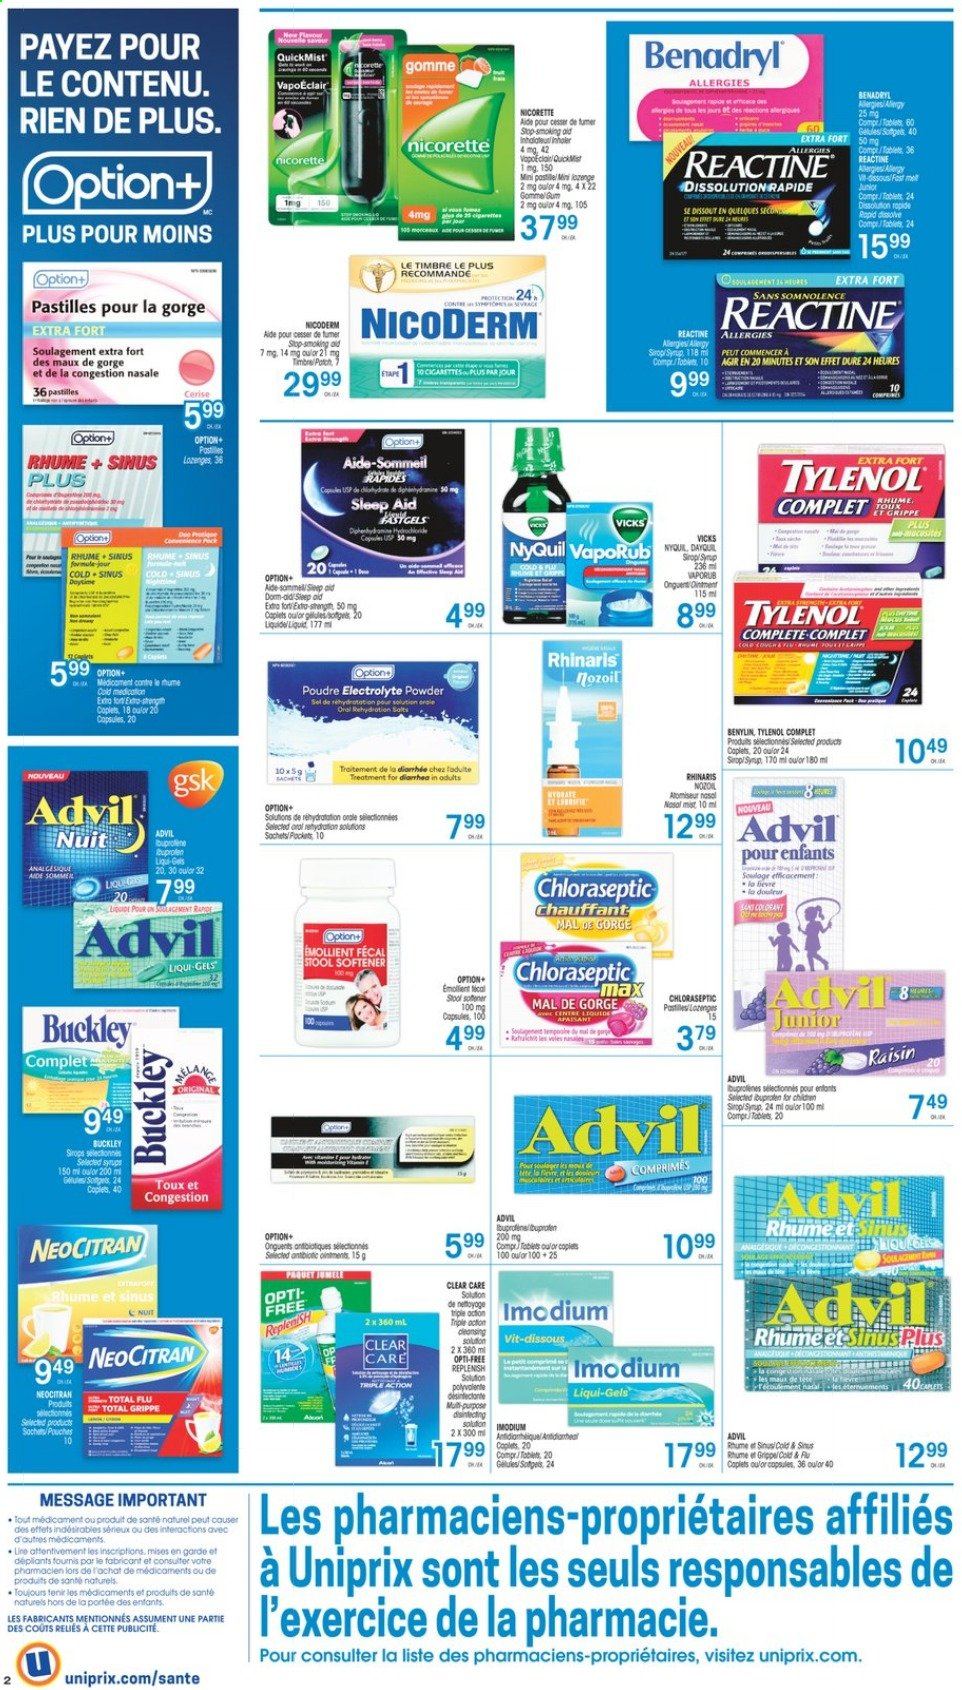 thumbnail - Uniprix Flyer - February 25, 2021 - March 03, 2021 - Sales products - pastilles, syrup, fabric softener, Vicks, Clear Care, NicoDerm, Nicorette, Tylenol, NyQuil, Advil Rapid, VapoRub, Benylin. Page 2.